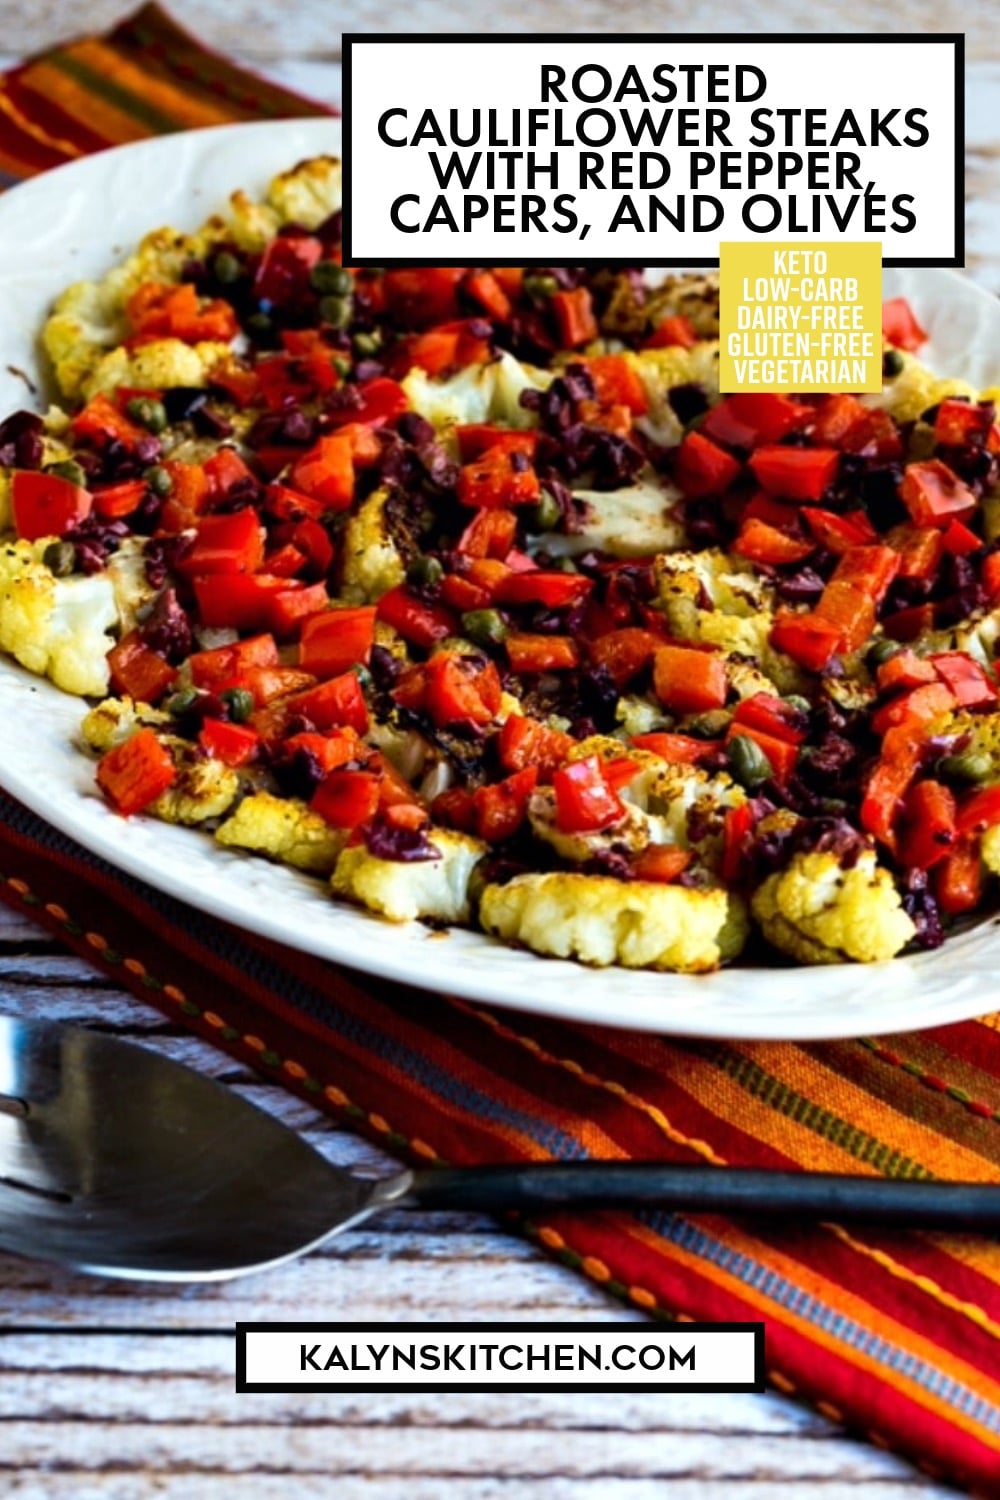 Pinterest image of Roasted Cauliflower Steaks with Red Pepper, Capers, and Olives